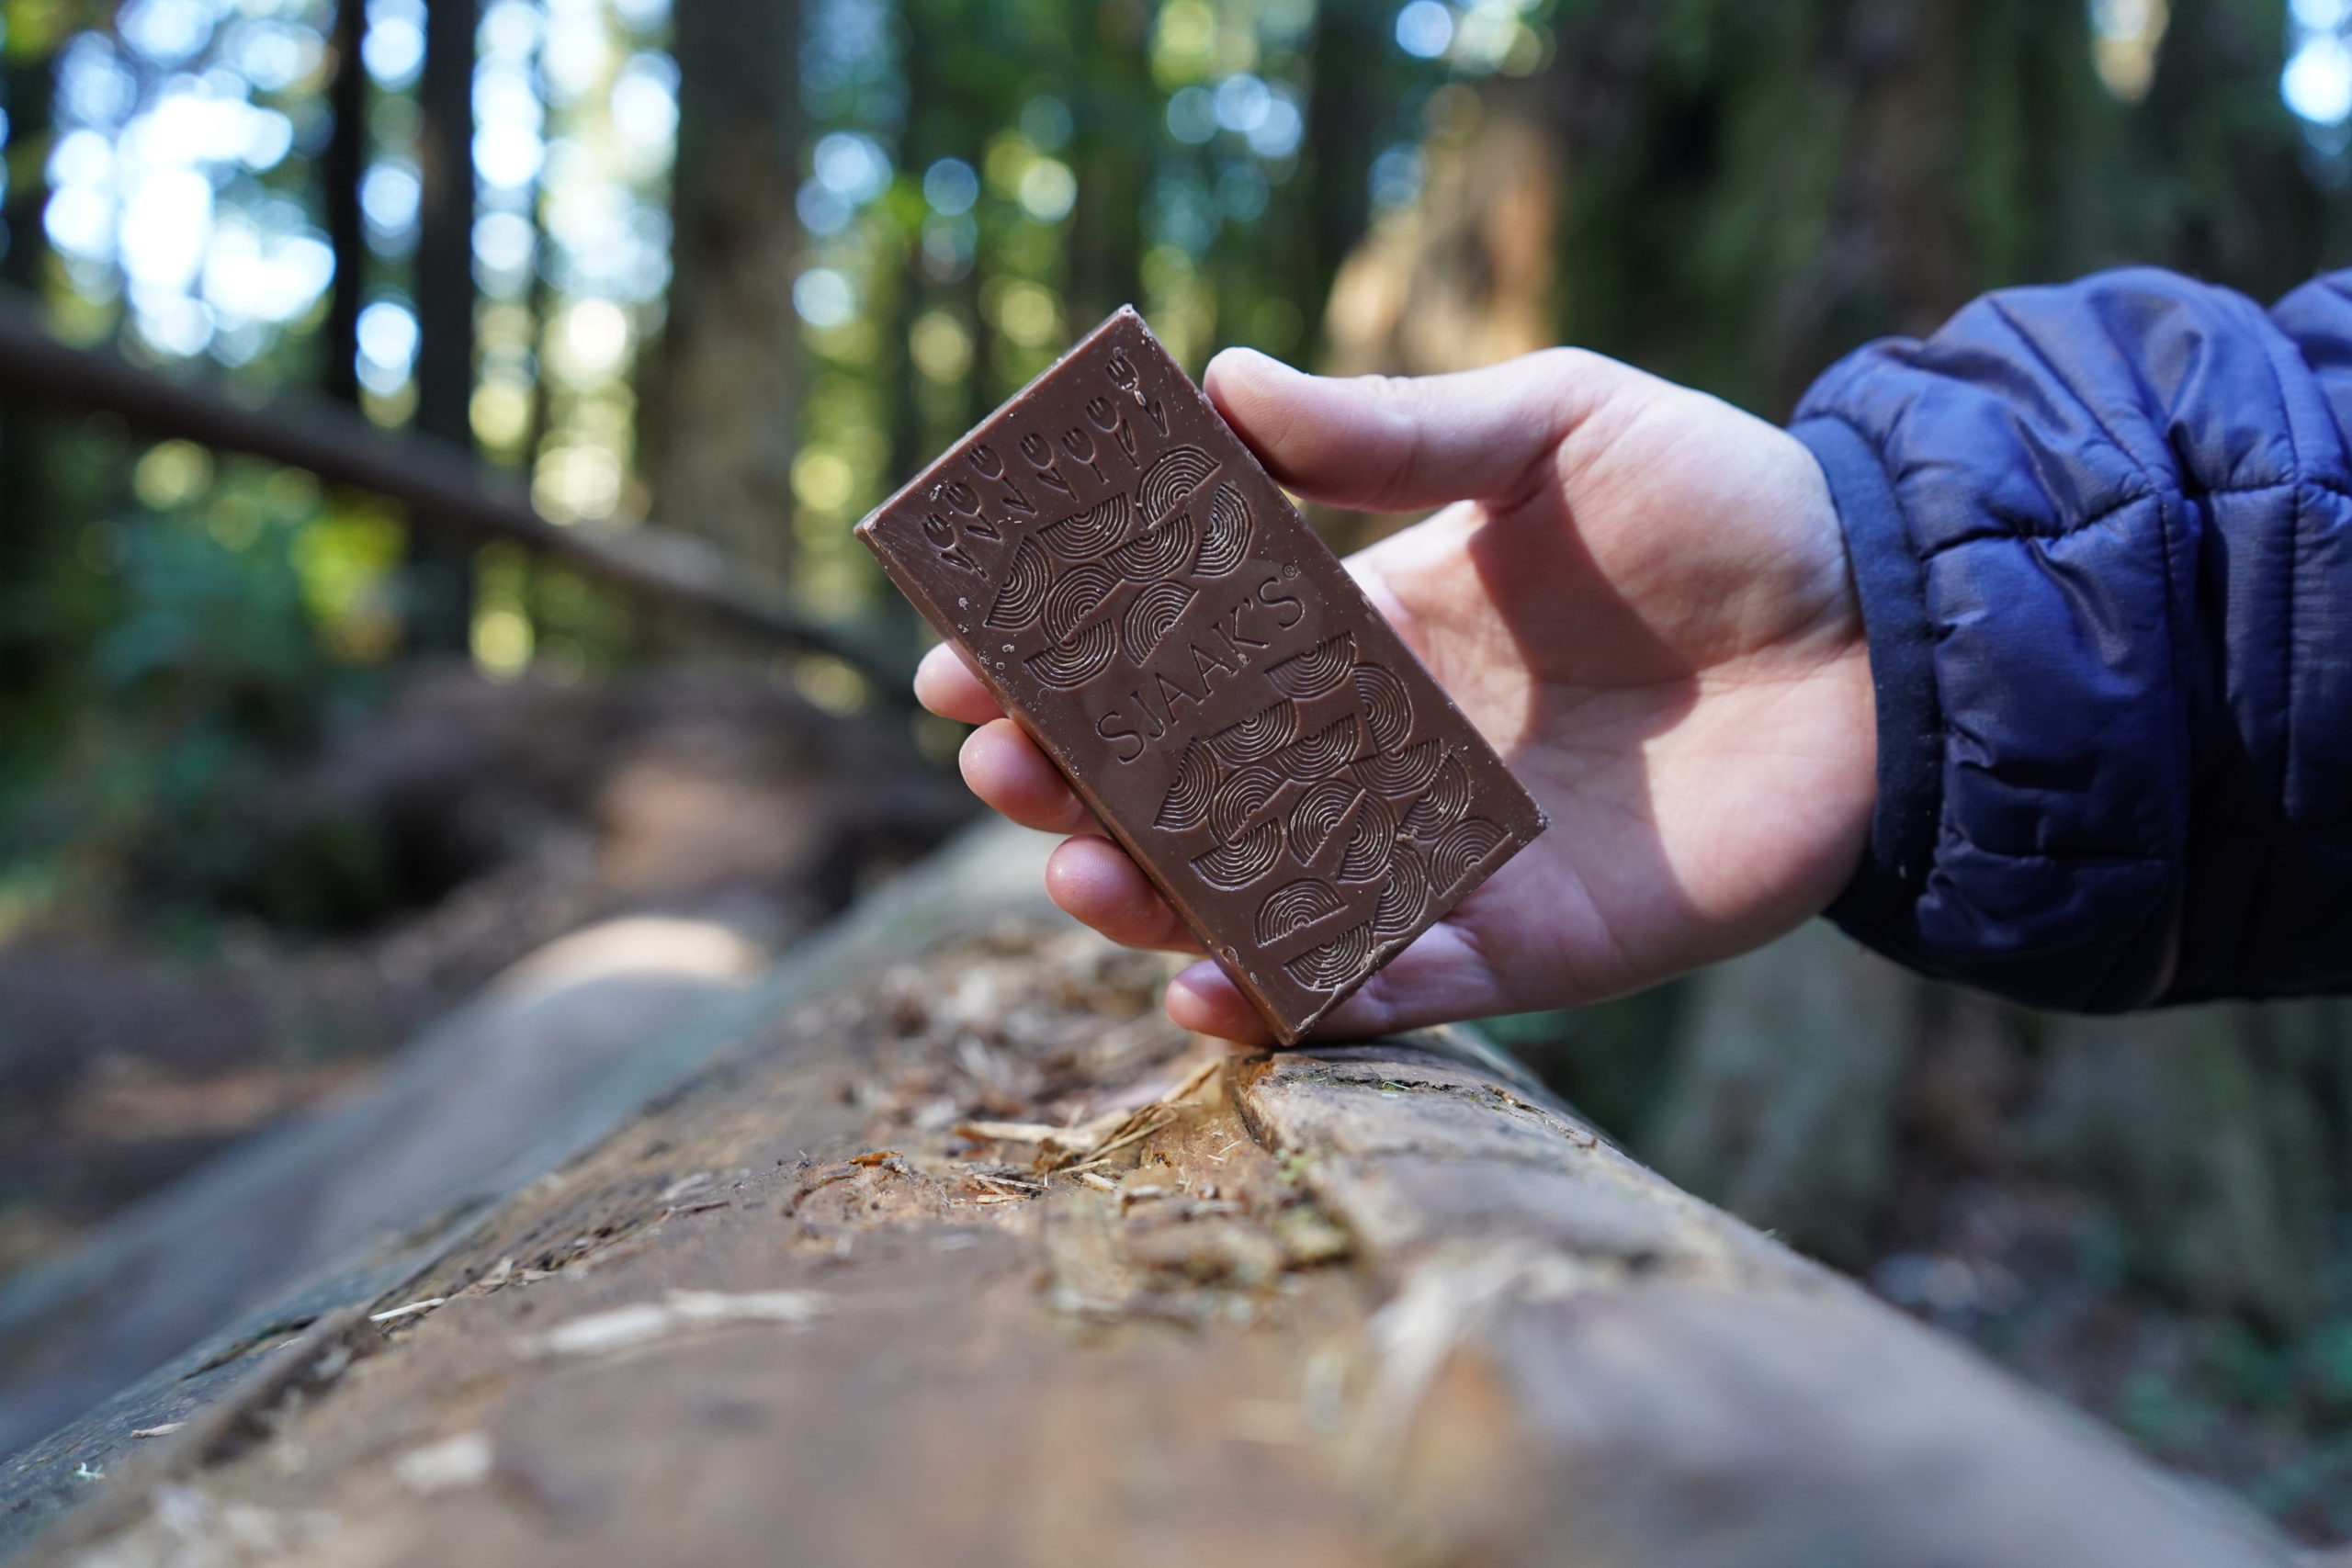 How Humboldt Inspired Our Newest Plant-Based Chocolate Bars